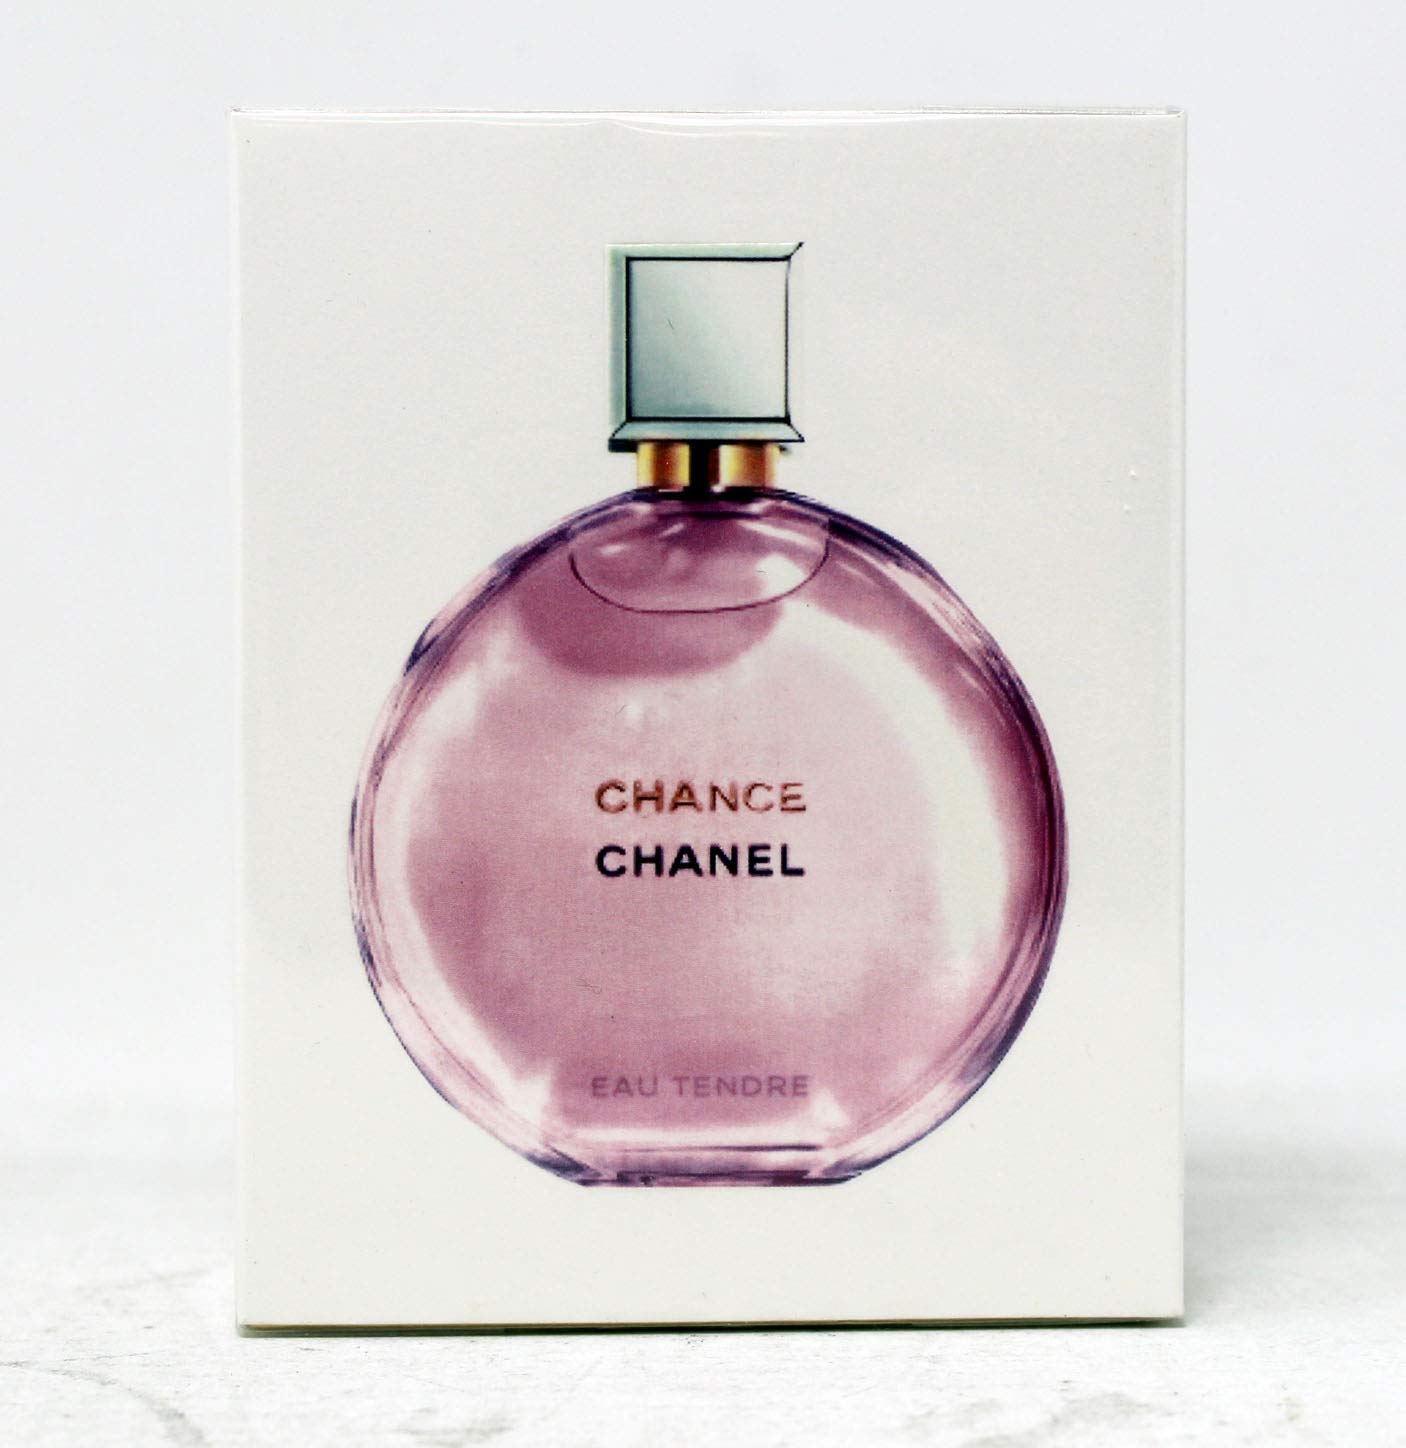 Chanel Chance dupe - 5 best clones as an alternative perfume